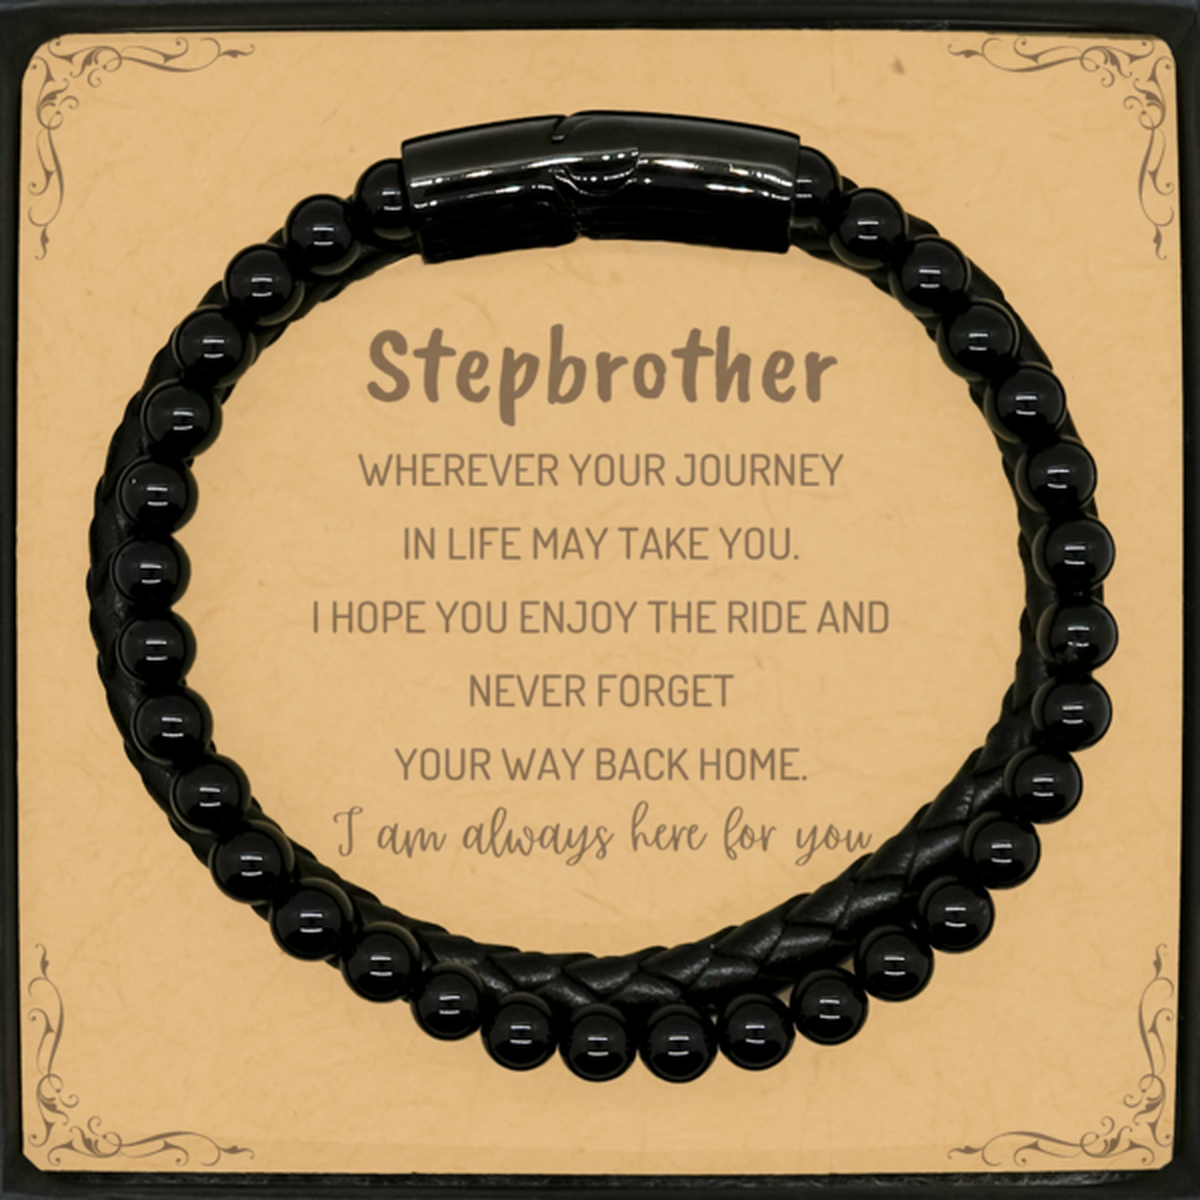 Stepbrother wherever your journey in life may take you, I am always here for you Stepbrother Stone Leather Bracelets, Awesome Christmas Gifts For Stepbrother Message Card, Stepbrother Birthday Gifts for Men Women Family Loved One